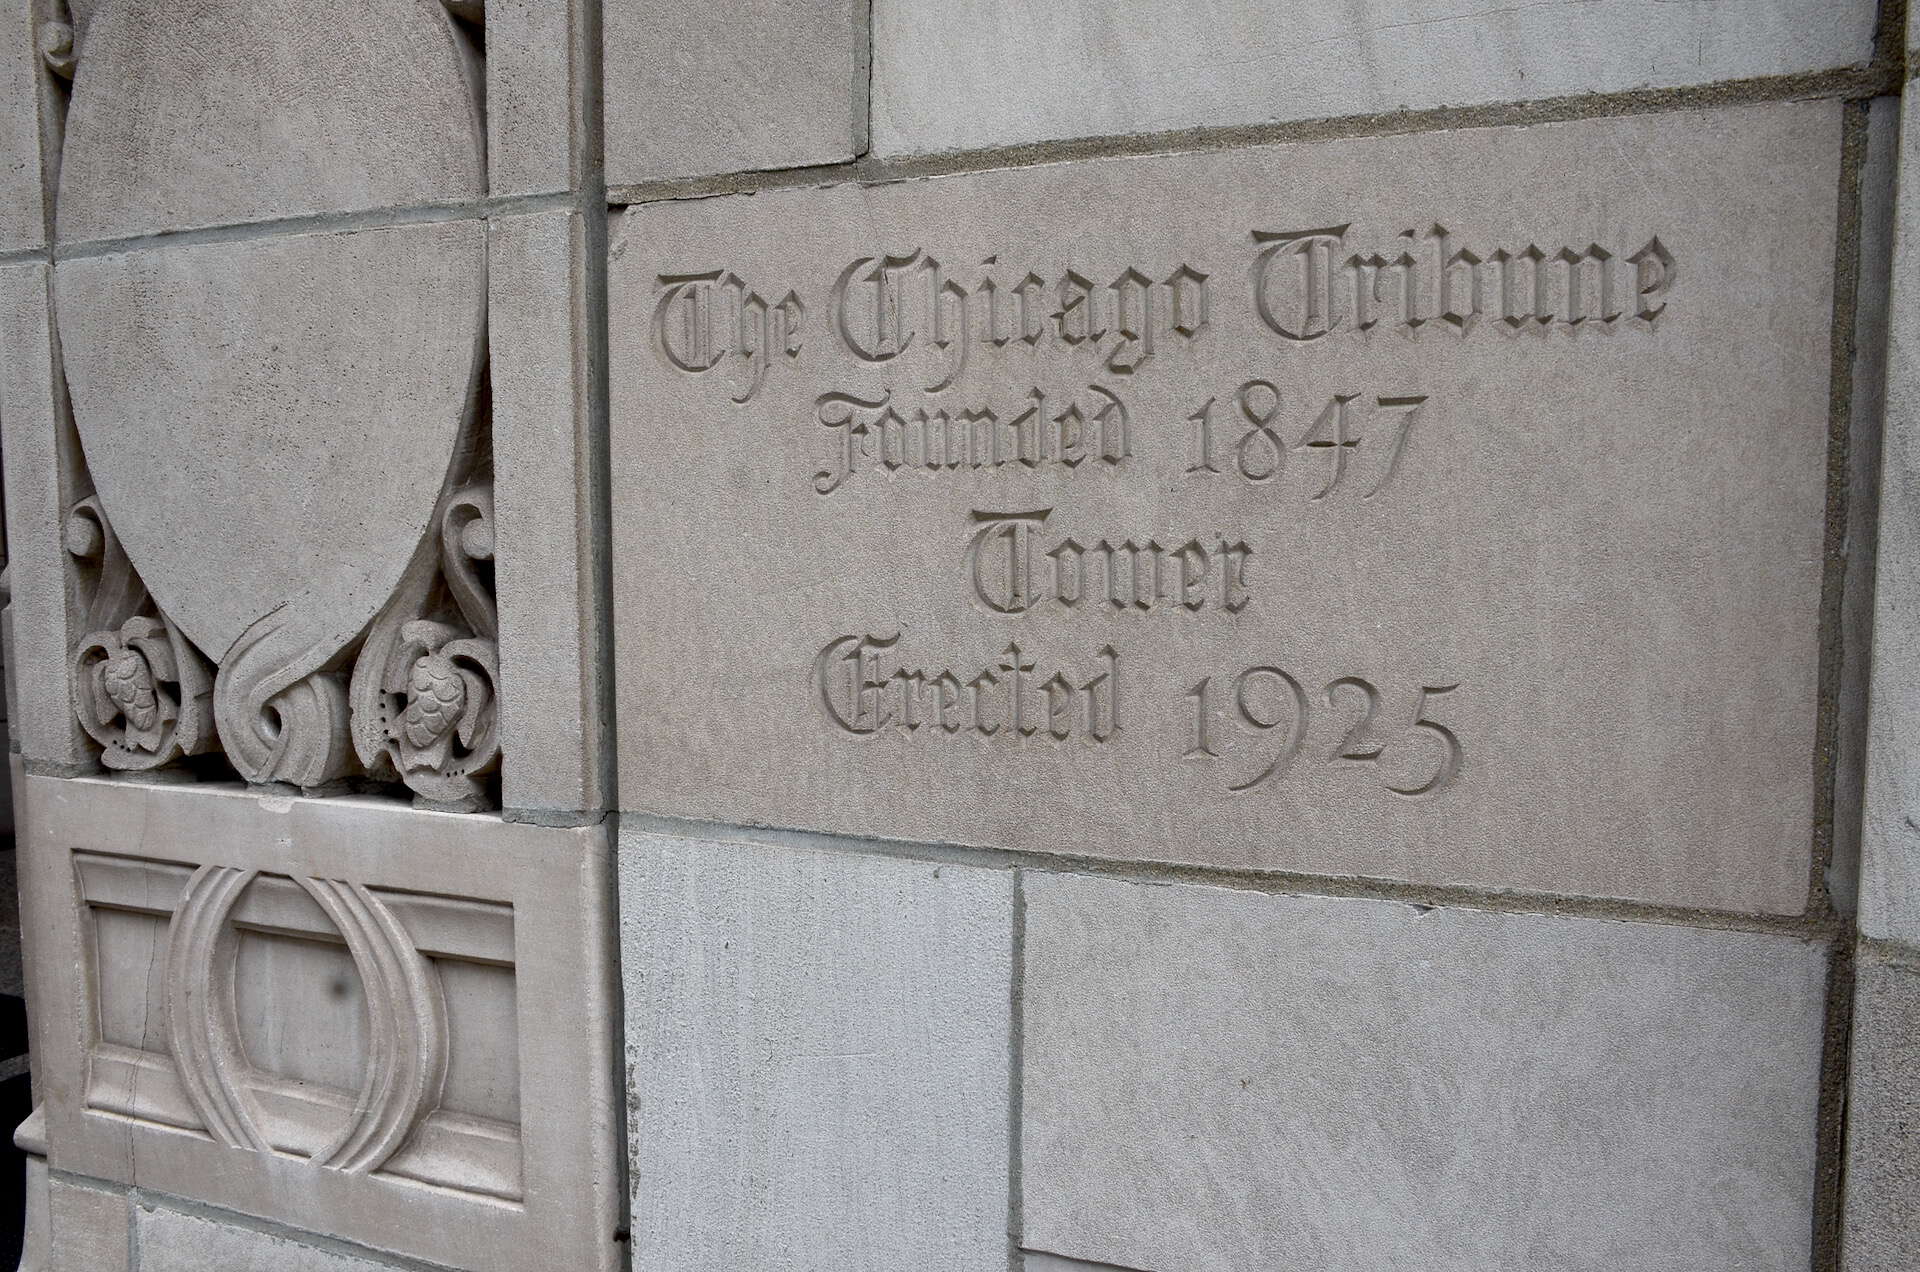 Plaque on the Tribune Tower in Chicago, Illinois